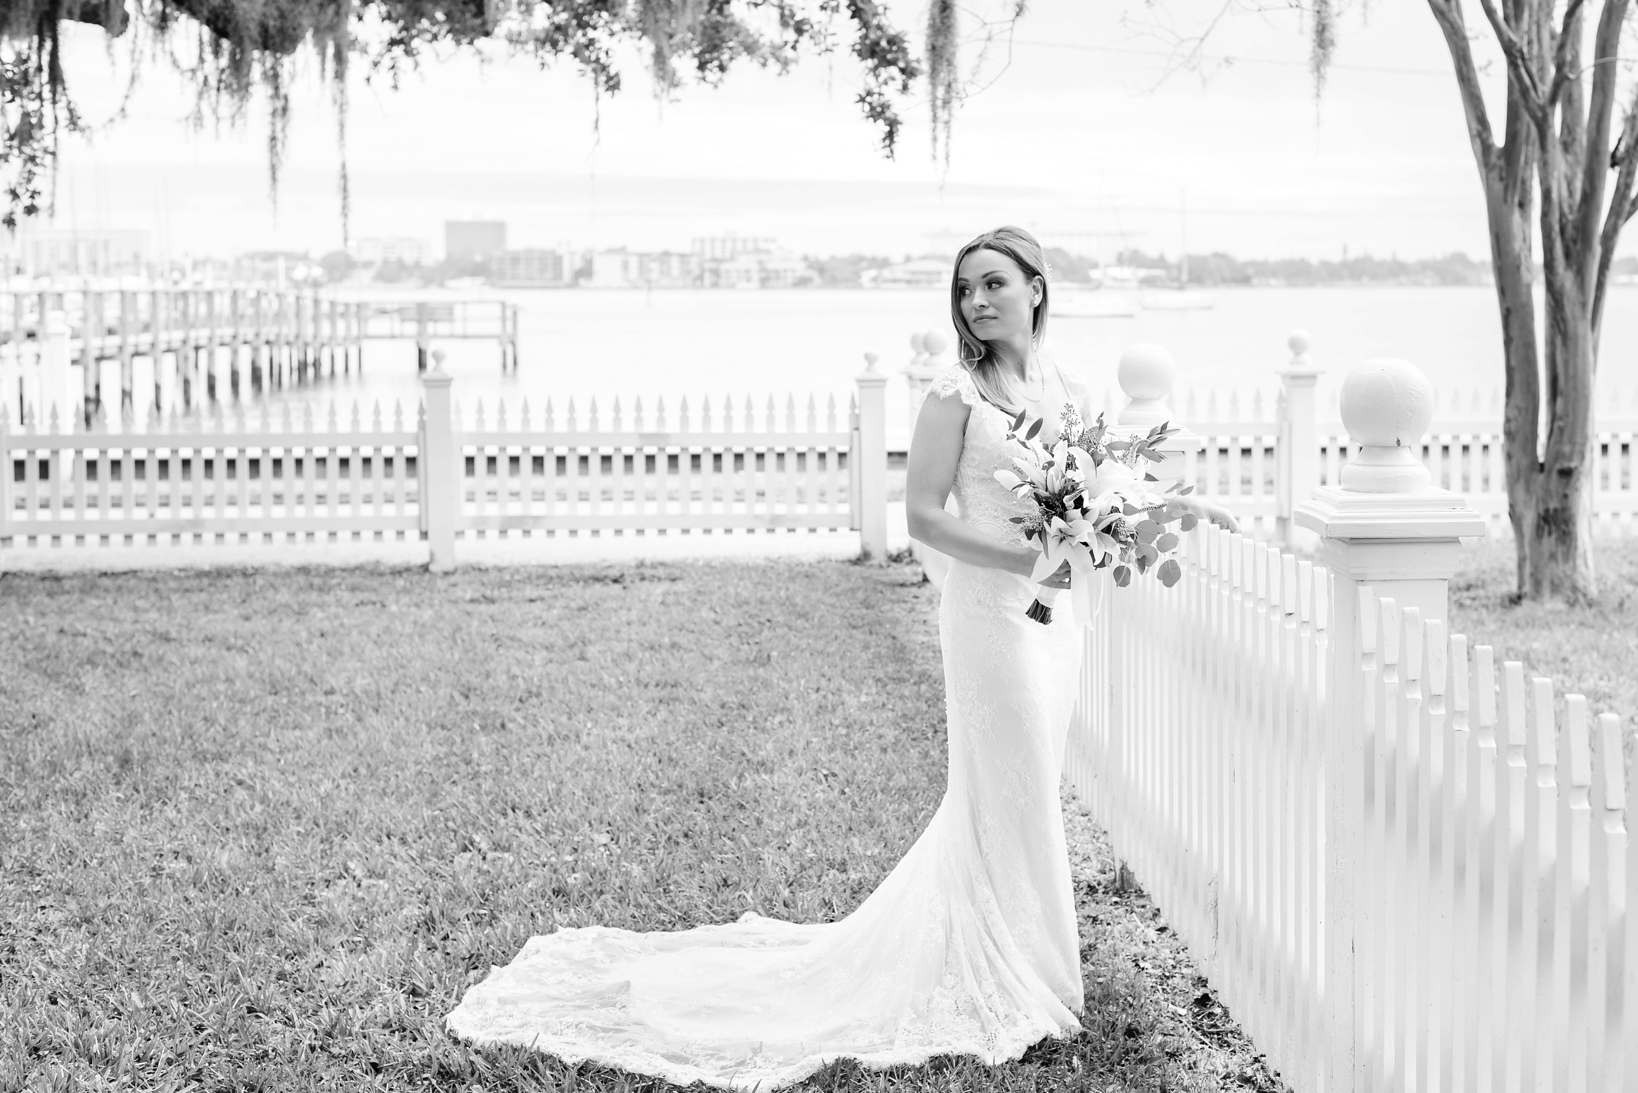 Black and White of the Bride holding her bouquet against a white picket fence